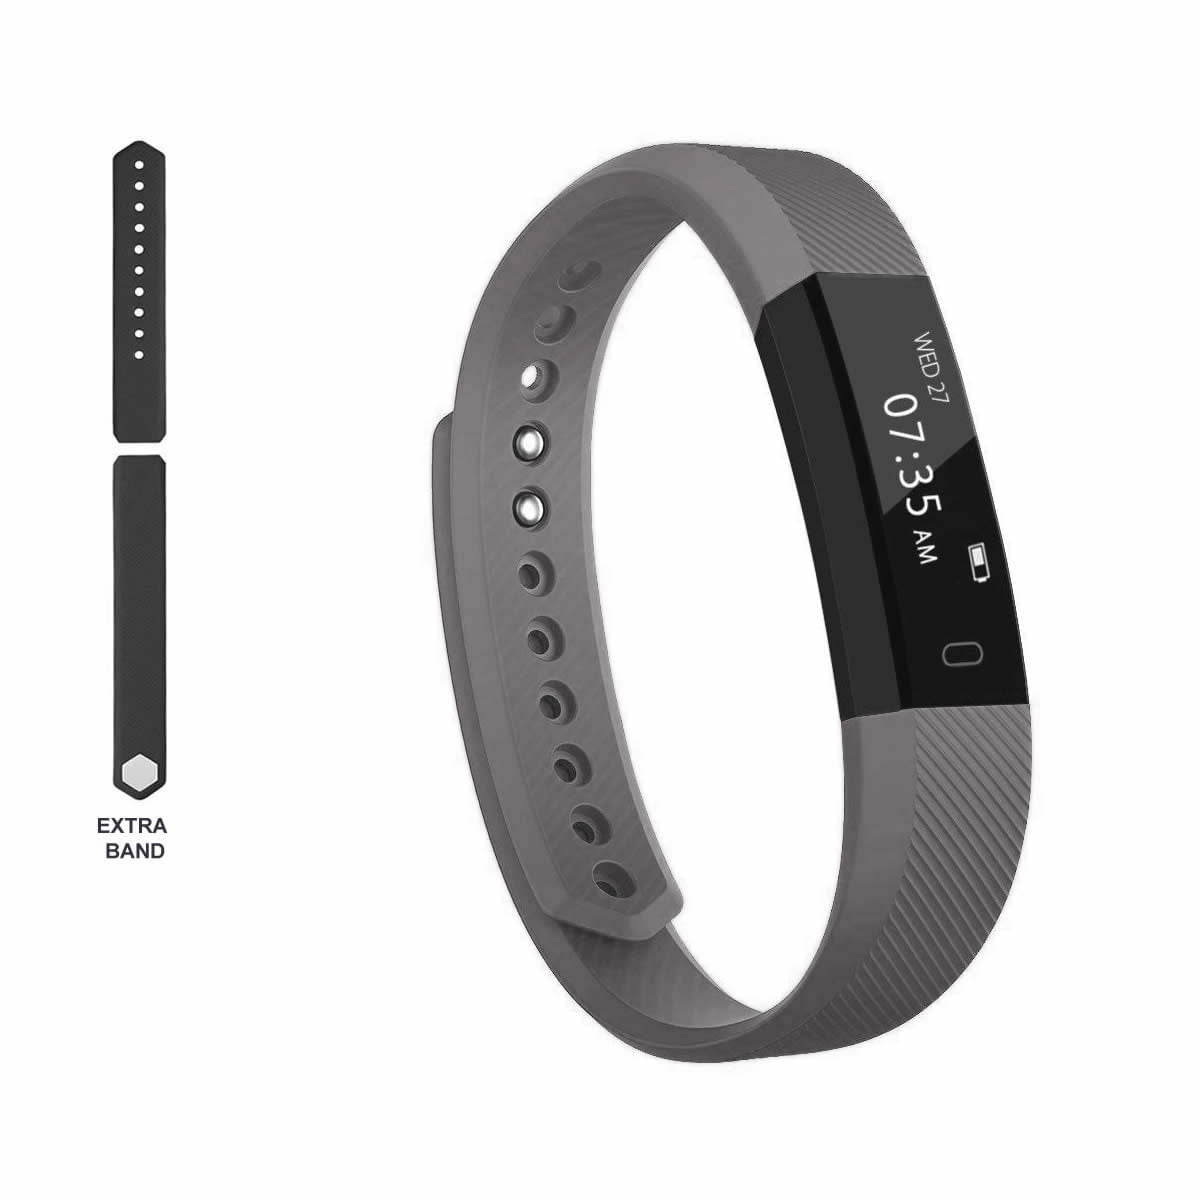 SmartFit Slim Activity Tracker And Monitor Smart Watch With FREE Extra Band -